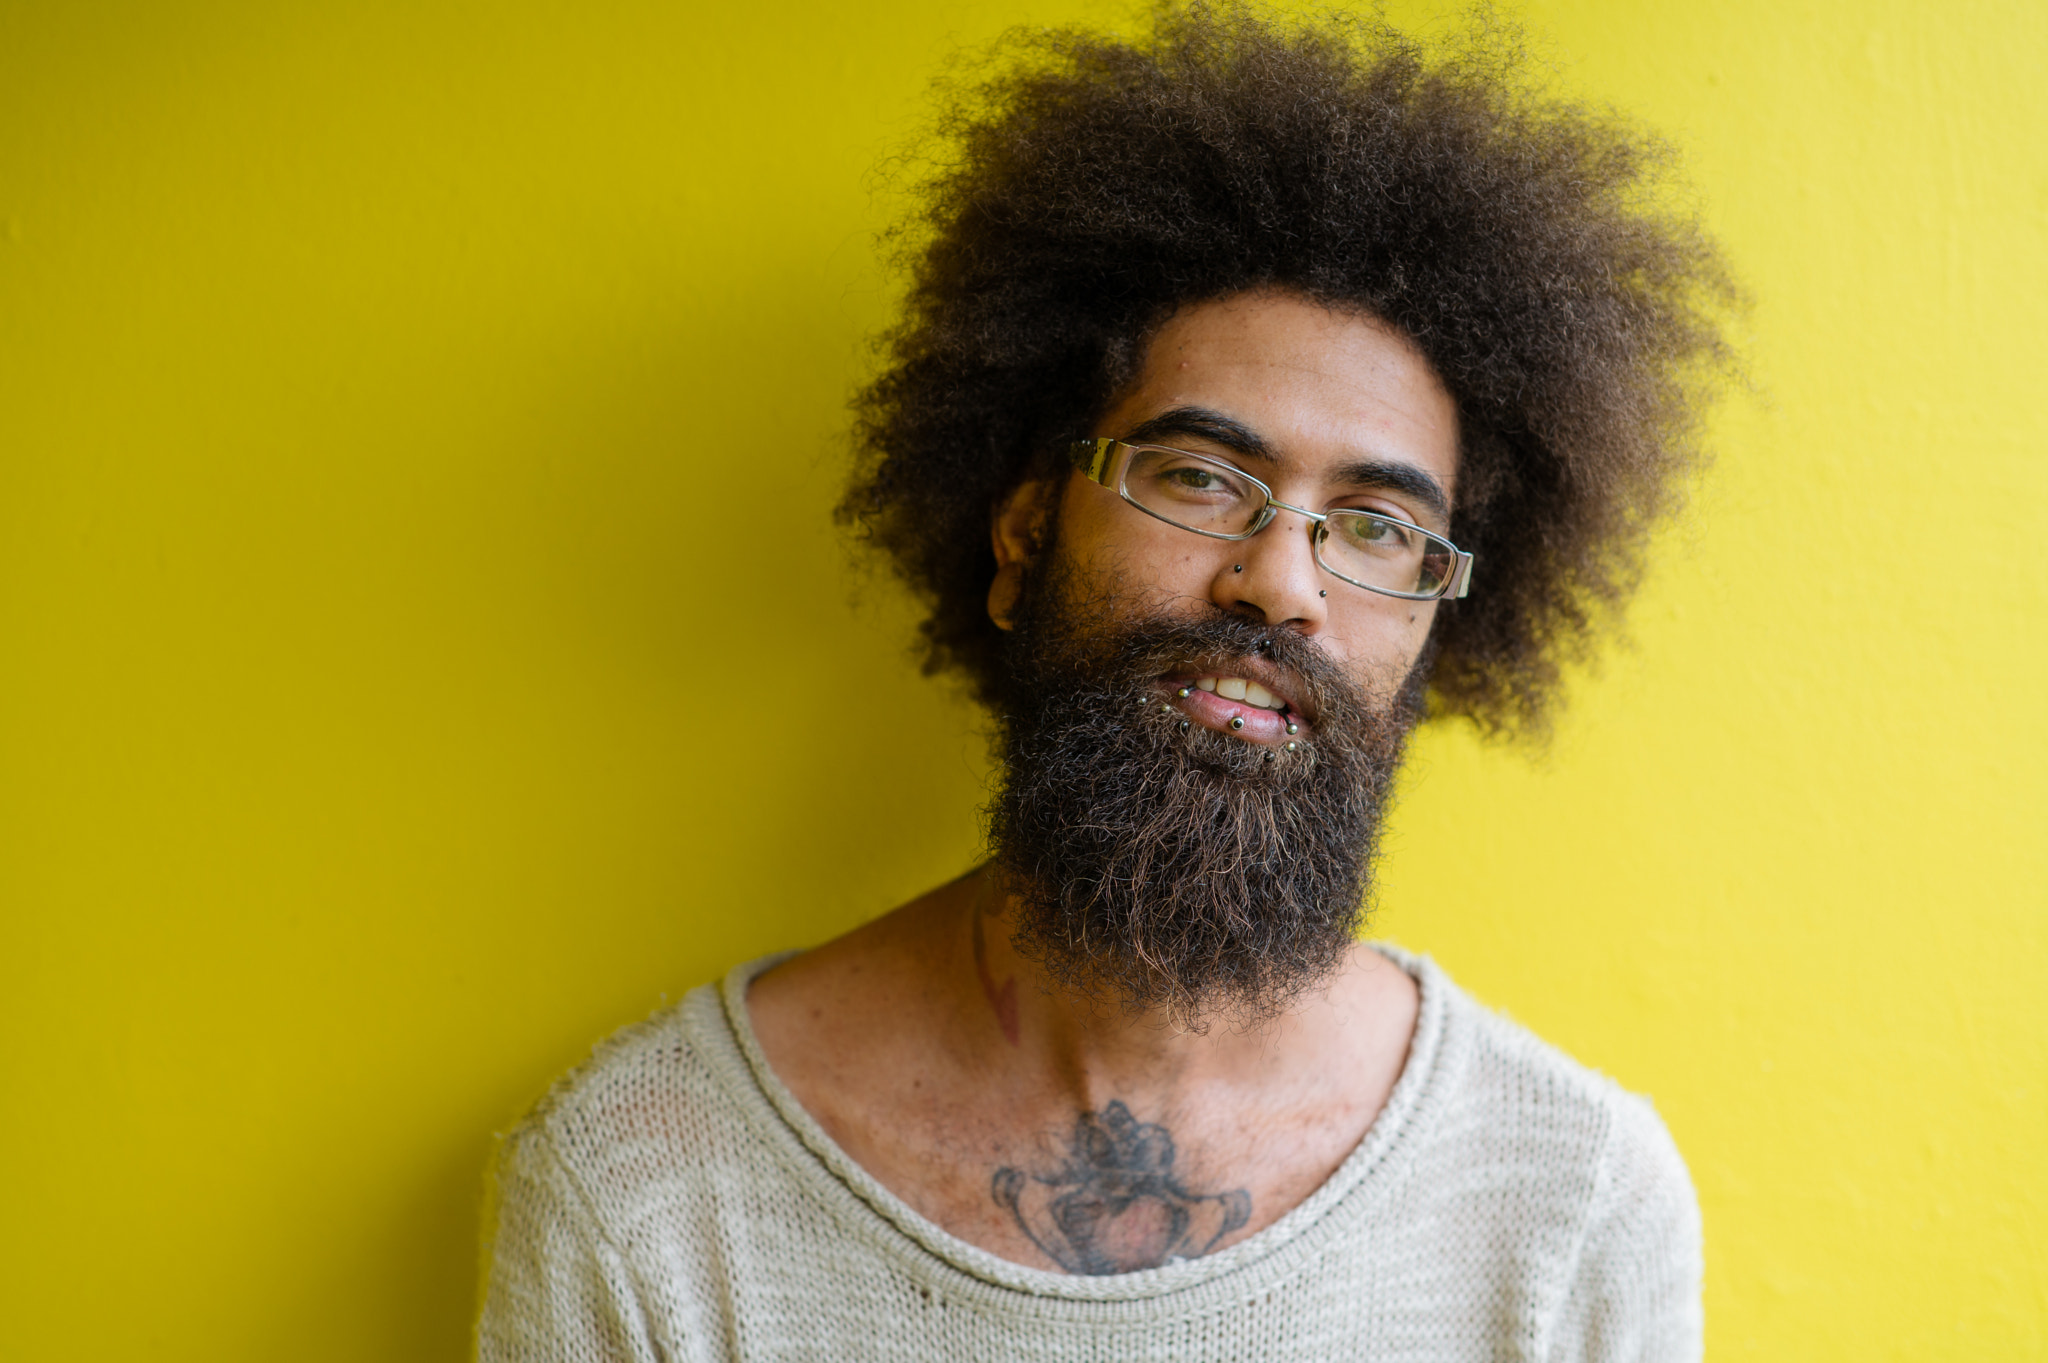 Close up portrait of bearded man with piercings and a afro